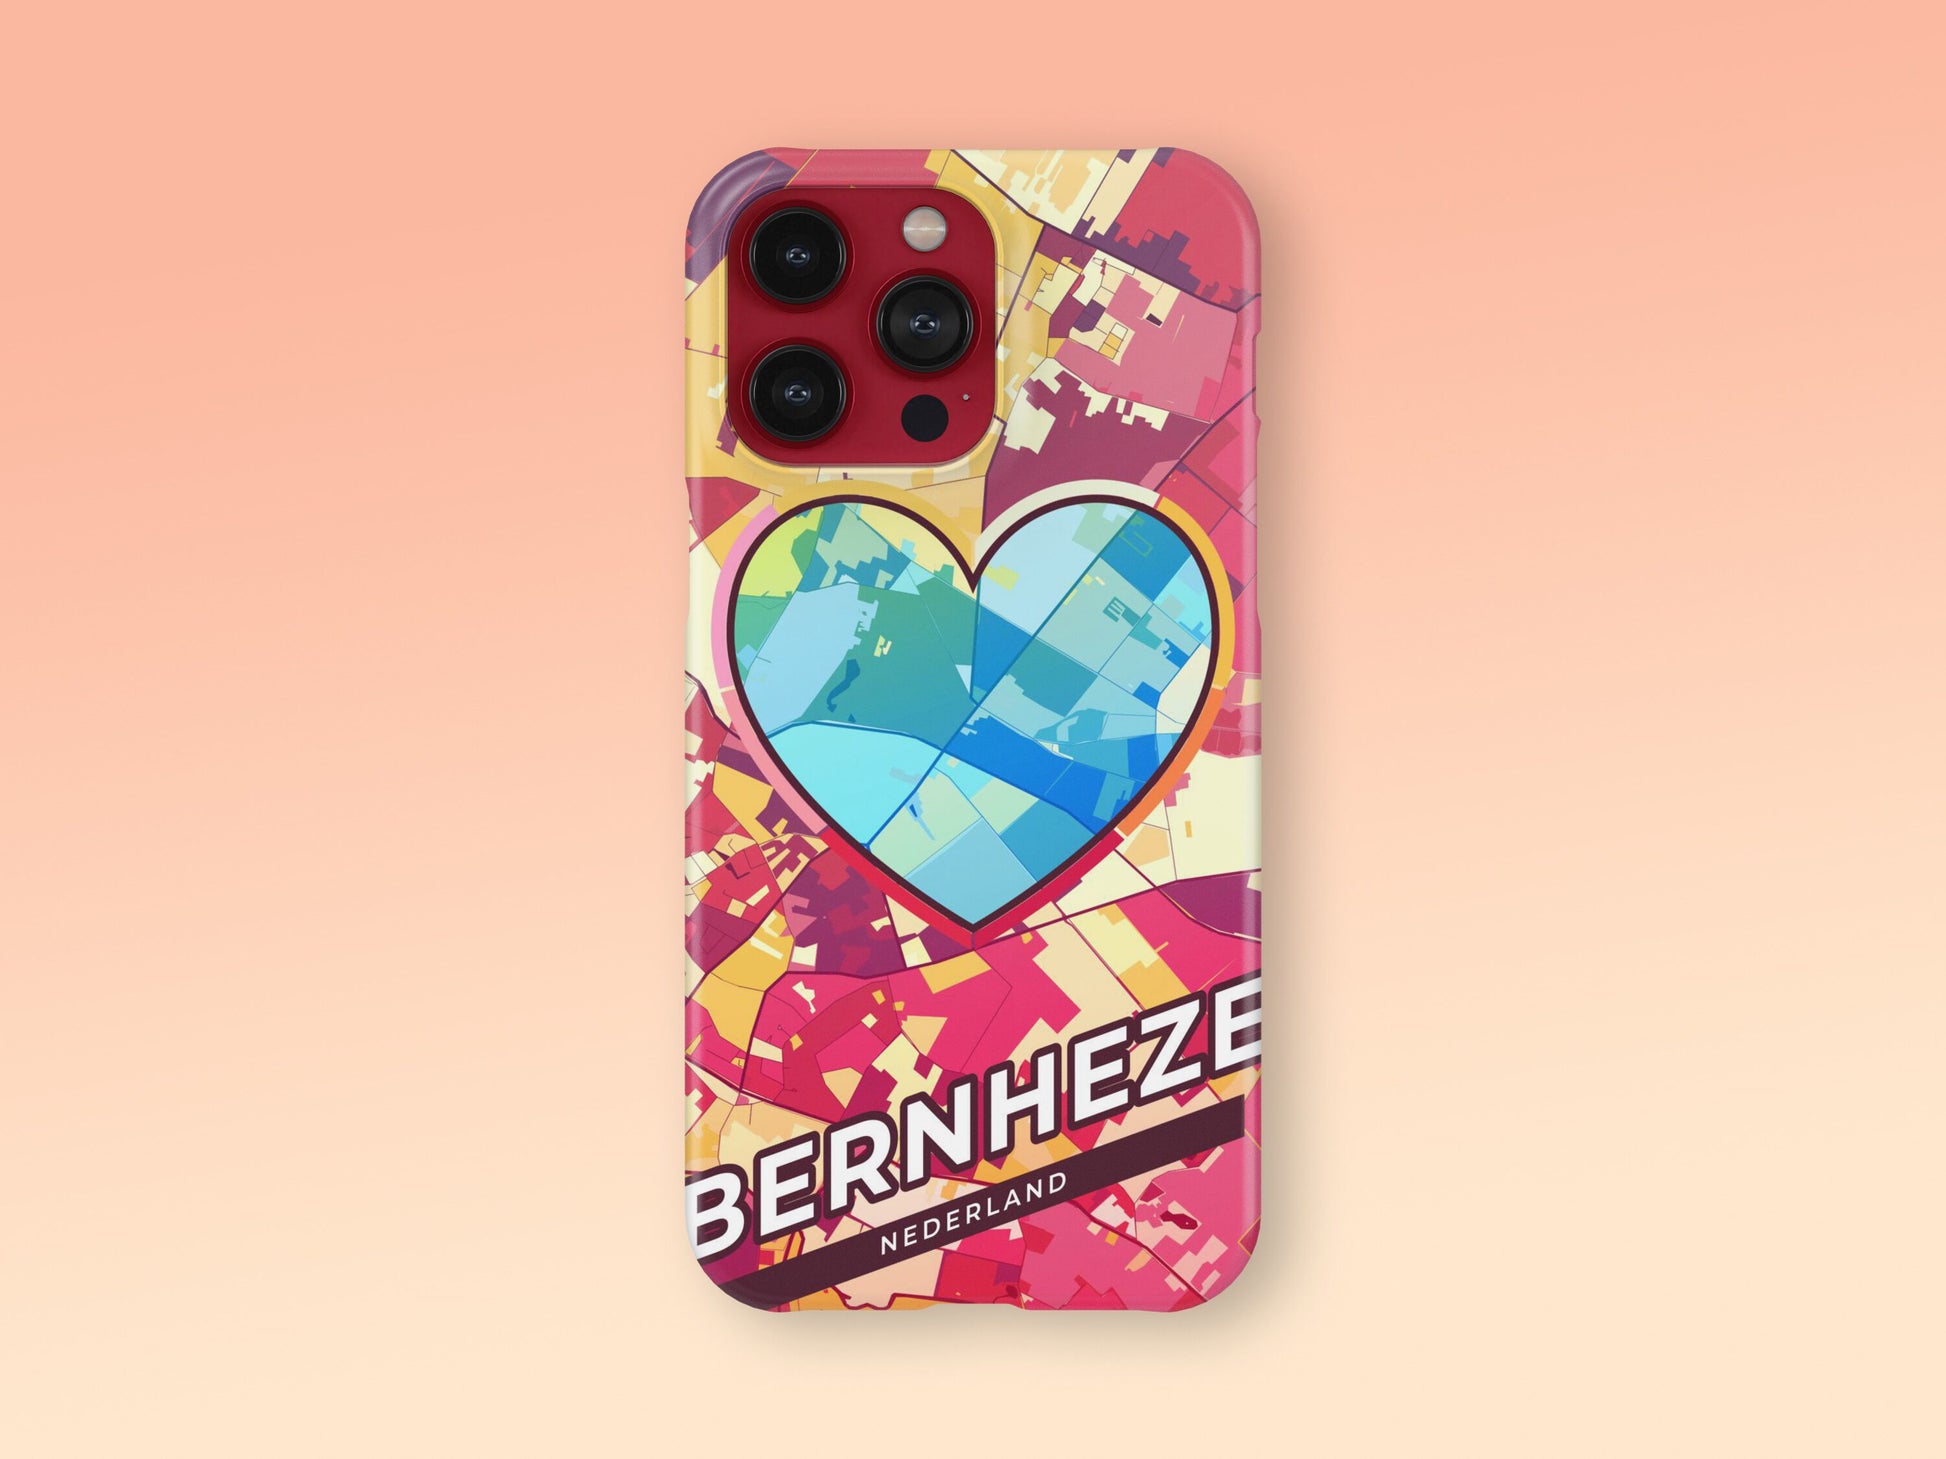 Bernheze Netherlands slim phone case with colorful icon. Birthday, wedding or housewarming gift. Couple match cases. 2